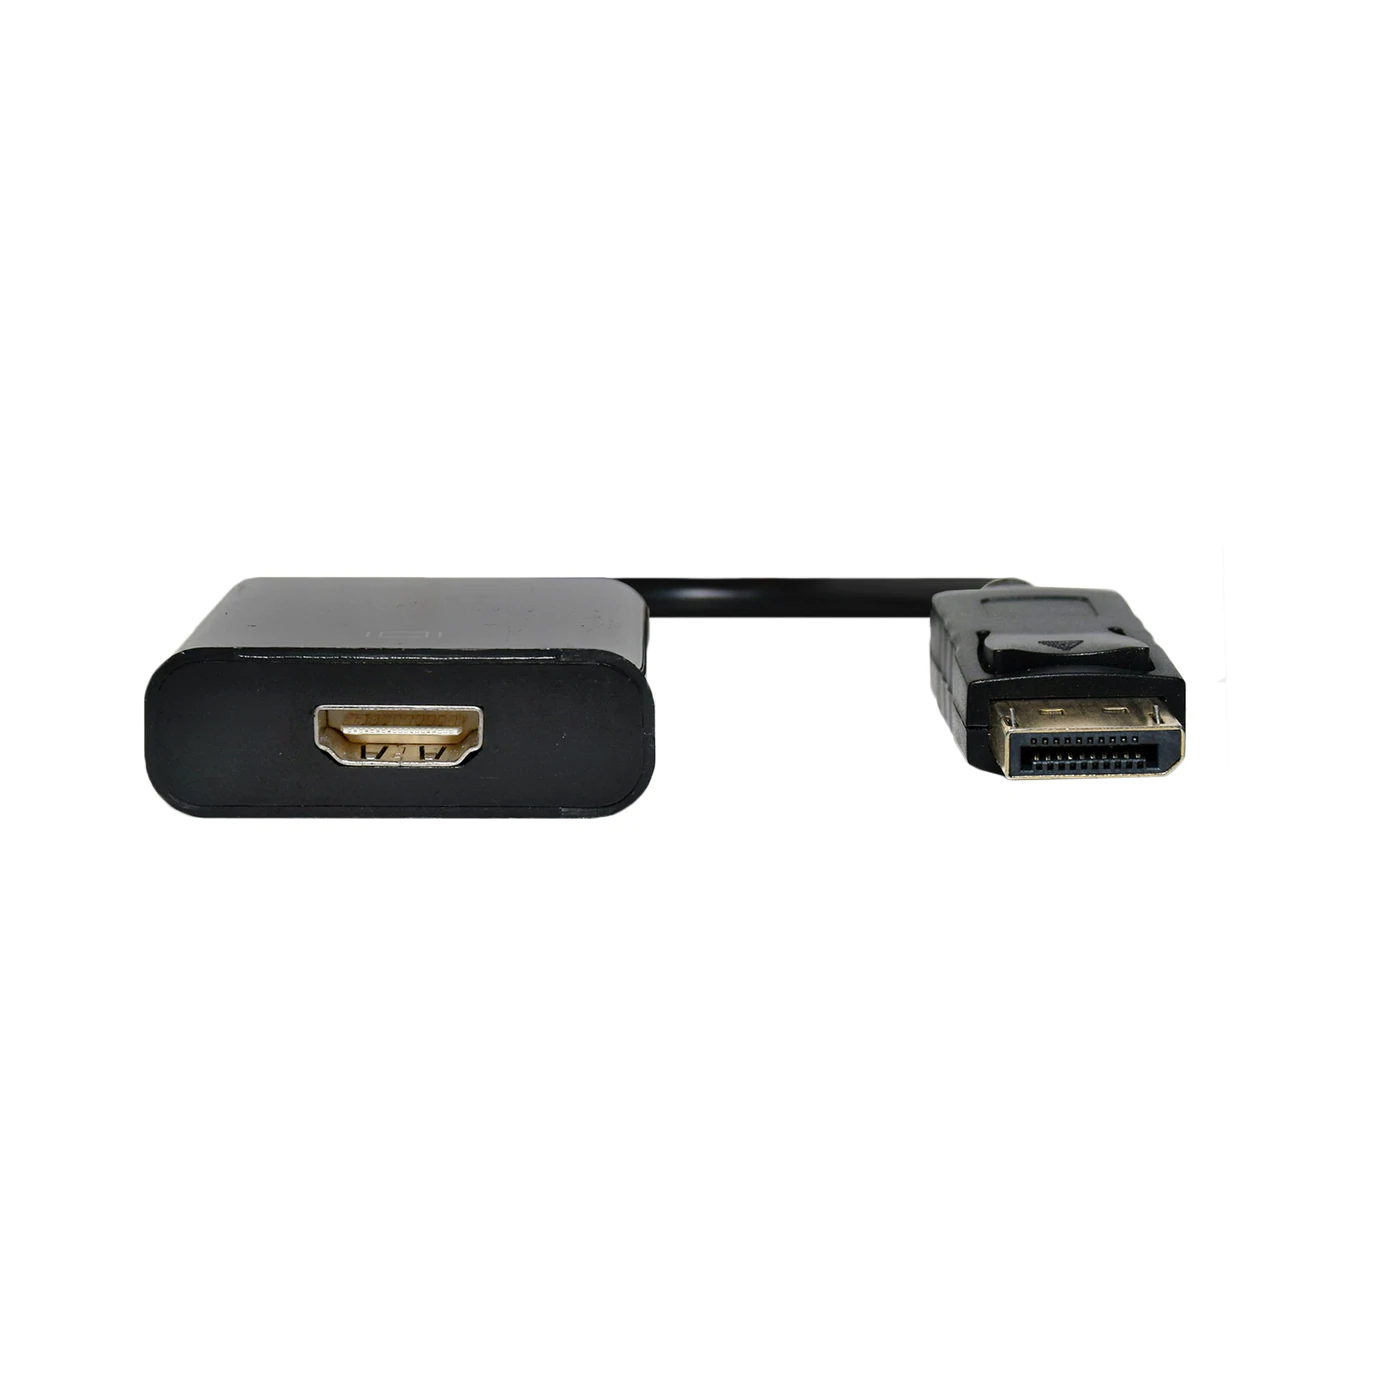 Buy AdzMozi Cable4K DisplayPort to HDMI Cable, Uni Directional DP to HDMI  Adapter, DisplayPort to HDMI Converter with Durable Shell, DP to HDMI Cord  for HDTV, Monitor, AMD, NVIDIA, Lenovo, HP, Online